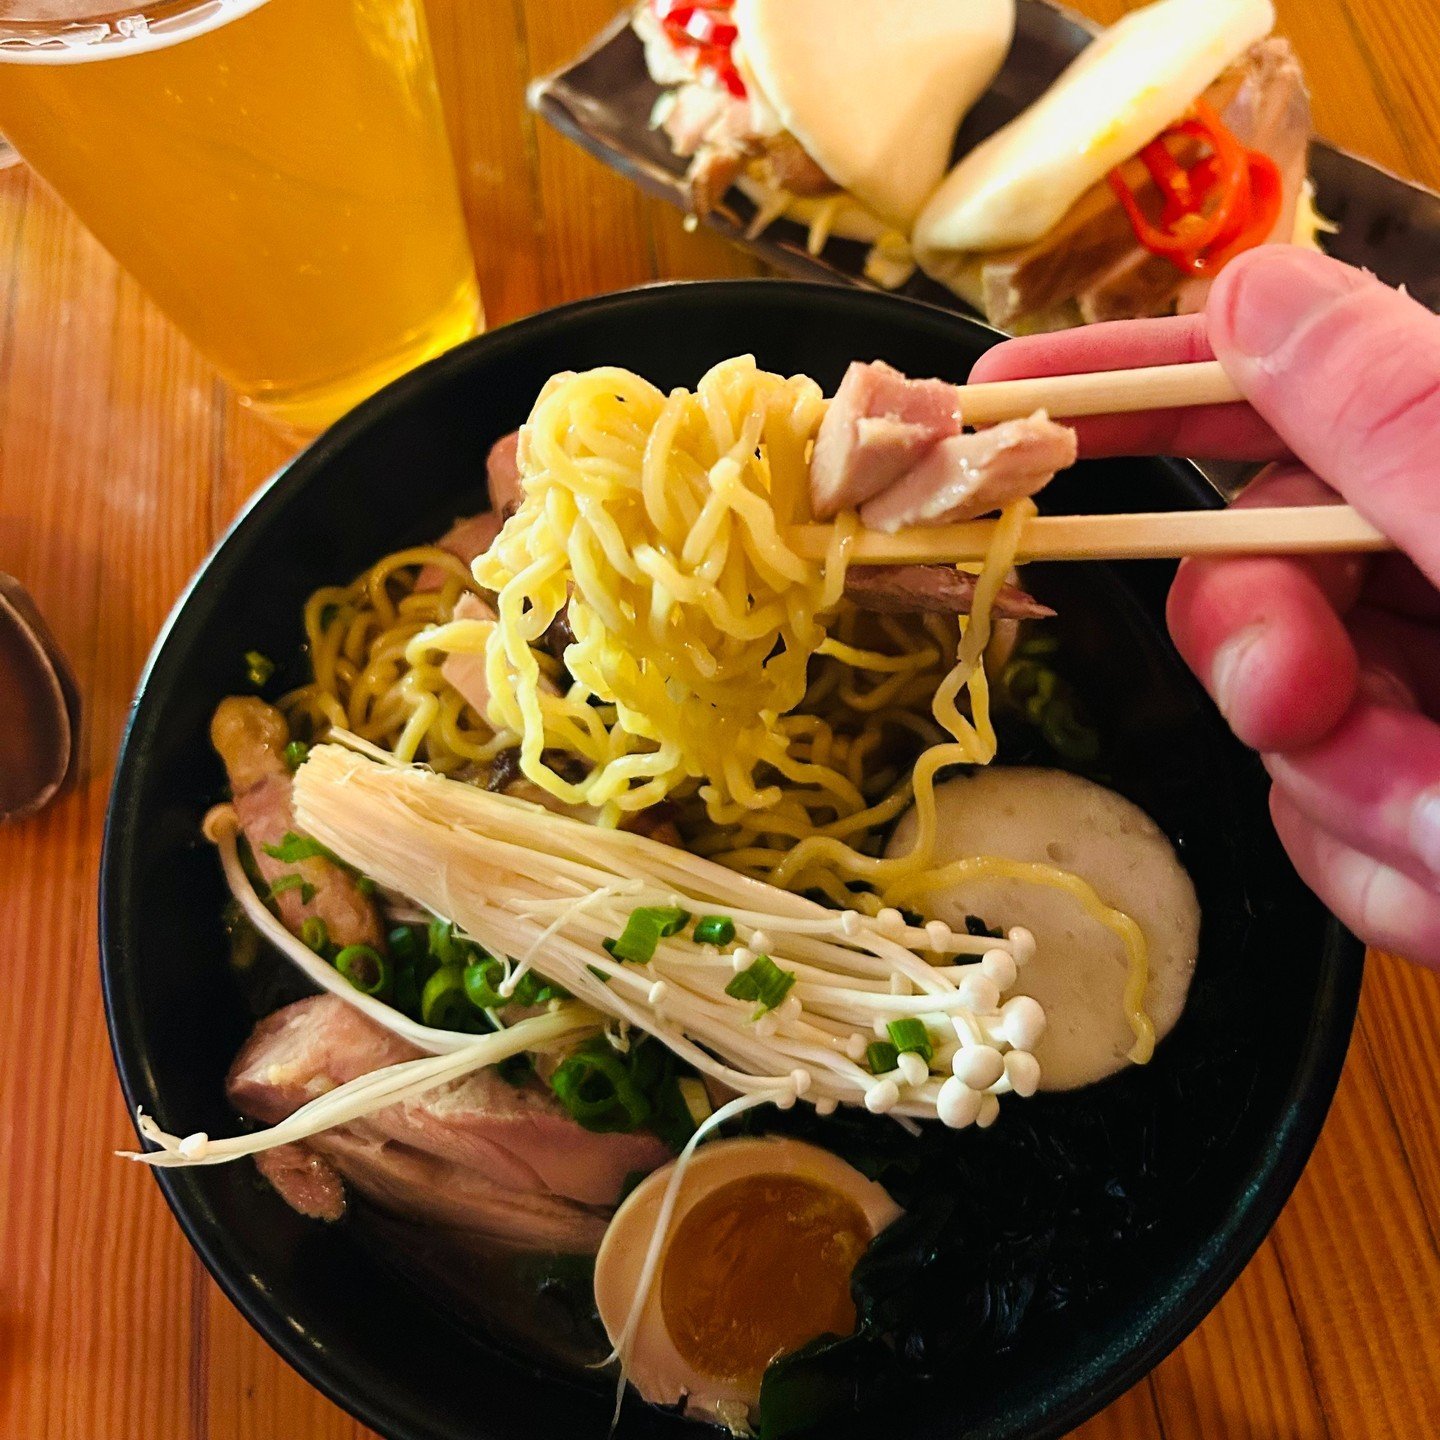 Shio makes the world go round 🌎✨ One of the oldest ramen seasonings sea salt (shio) reminds us of ramen&rsquo;s Chinese origins, &amp; Japan&rsquo;s reliance on the sea. This yummy dish is topped with smoked local chicken, wakame seaweed, enoki mush